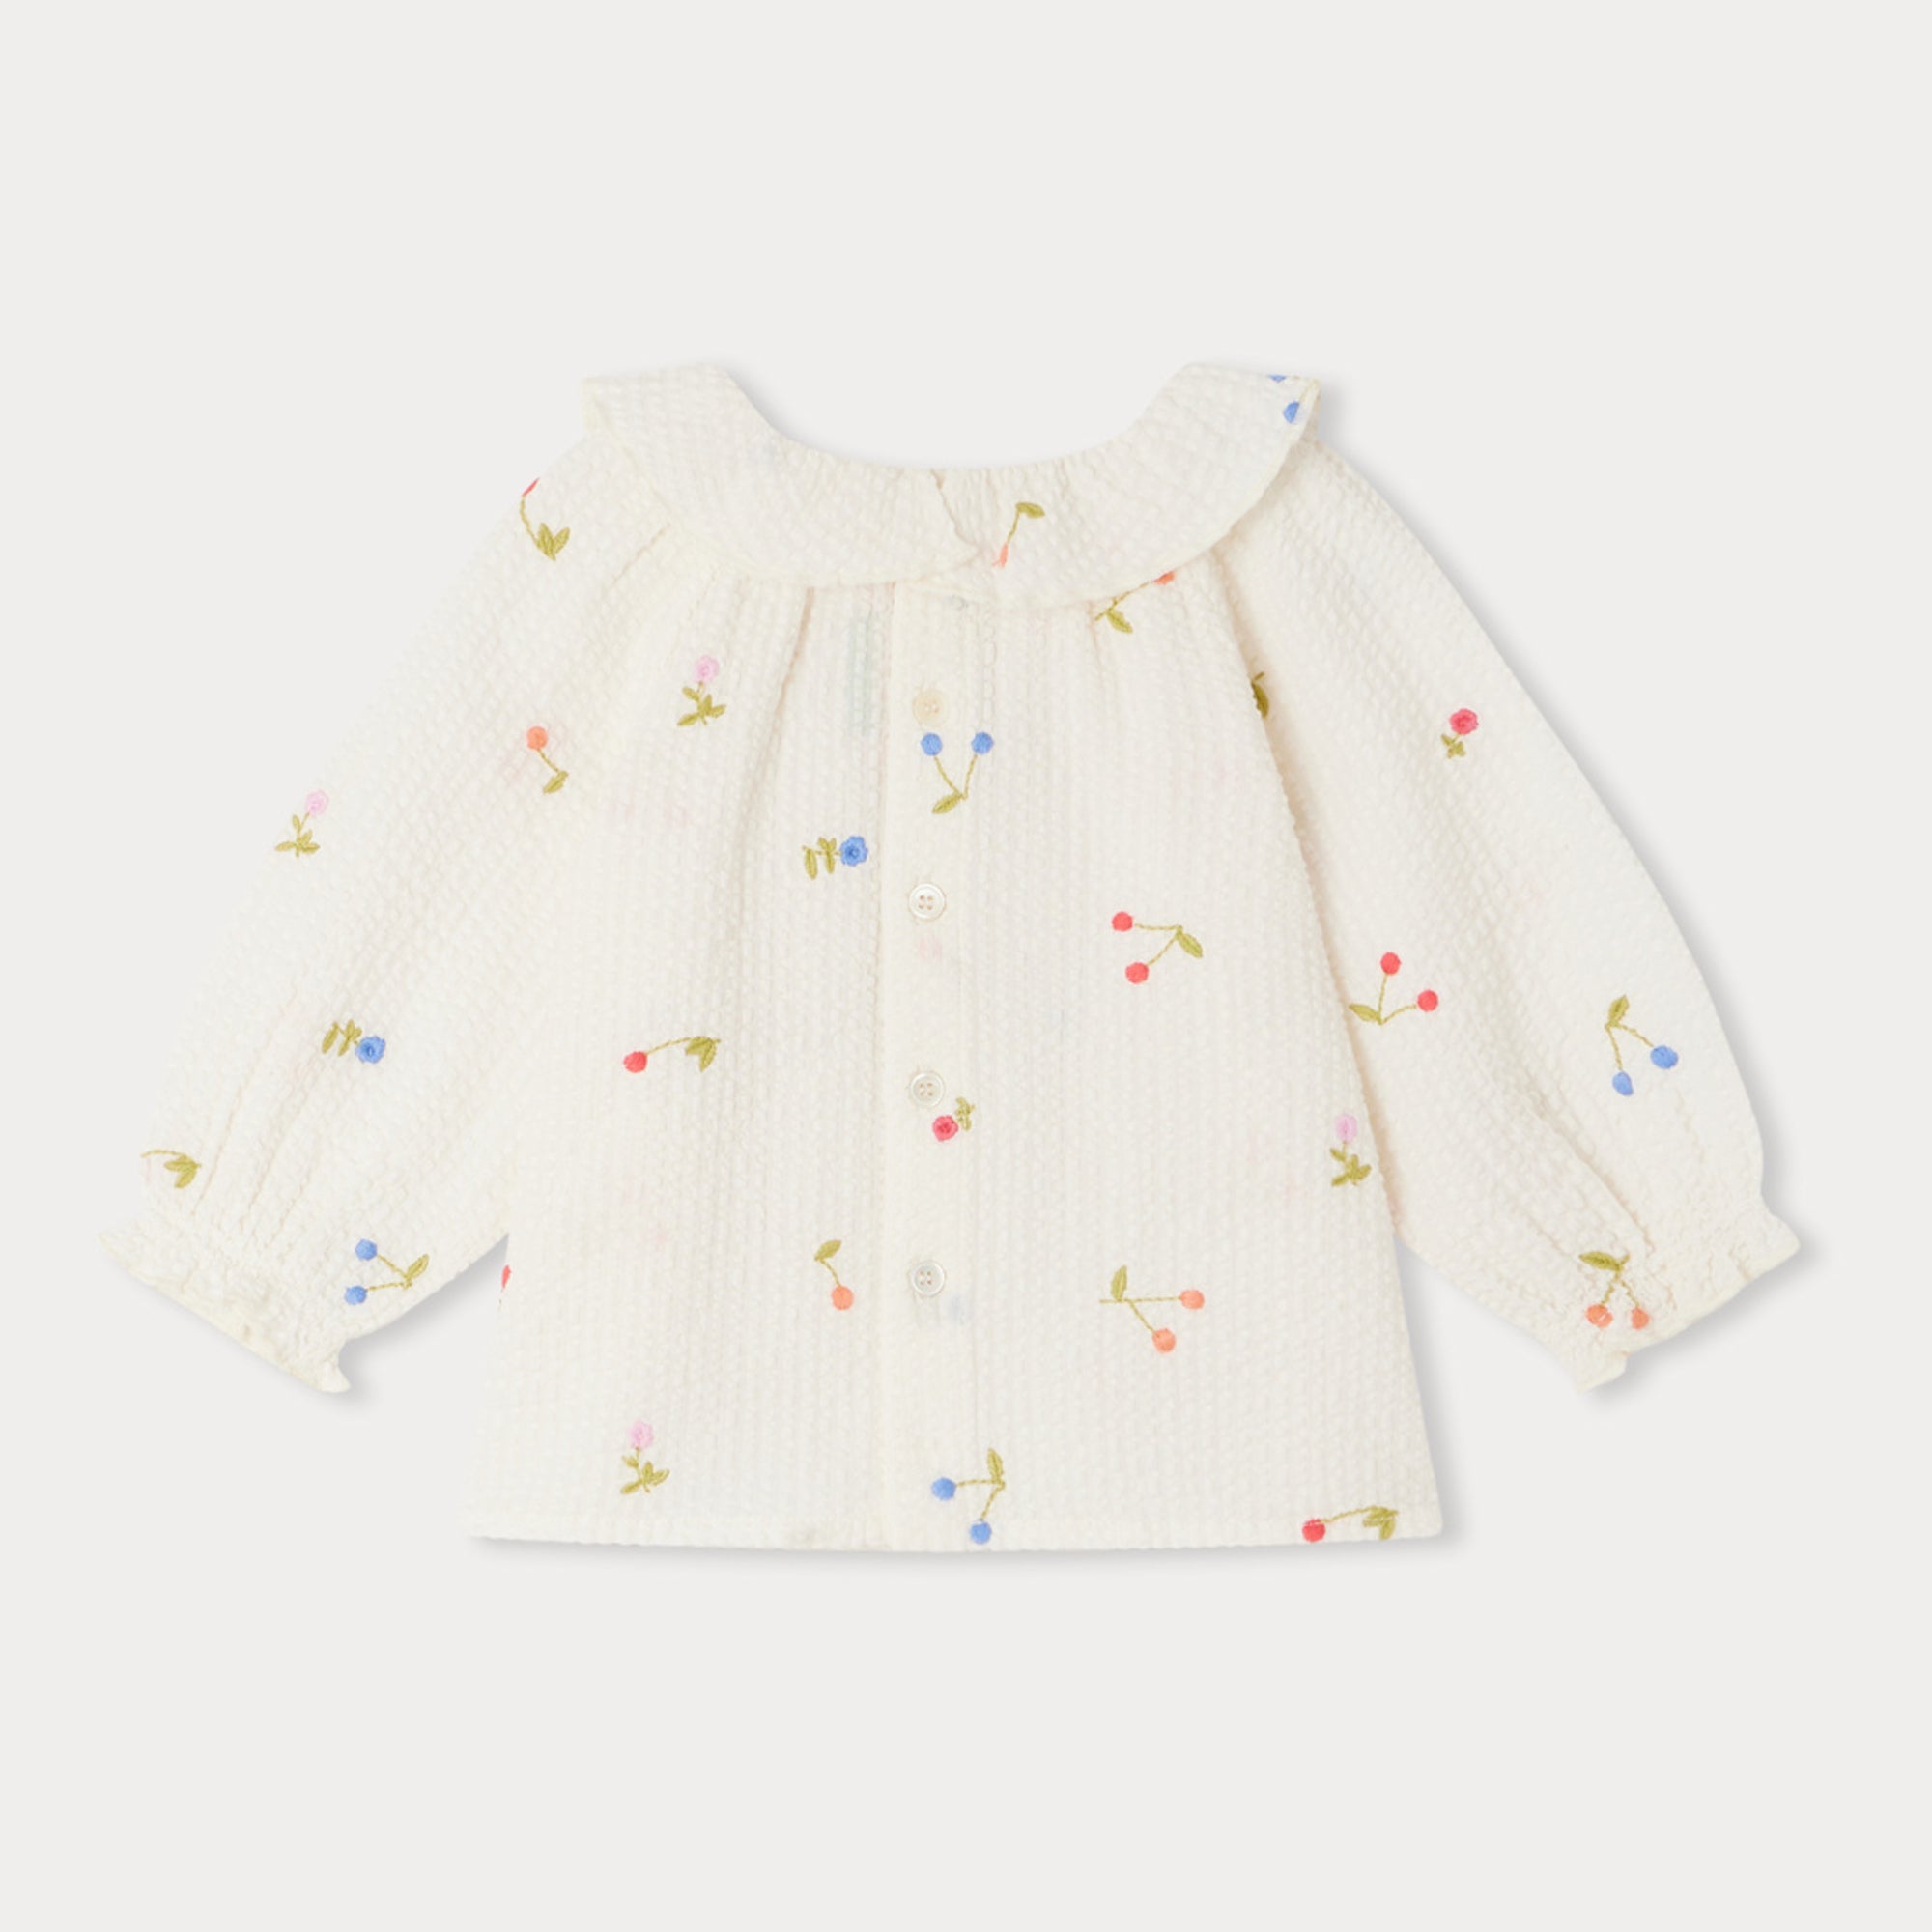 Baby Girls White Cherry Embroidered Cotton Top